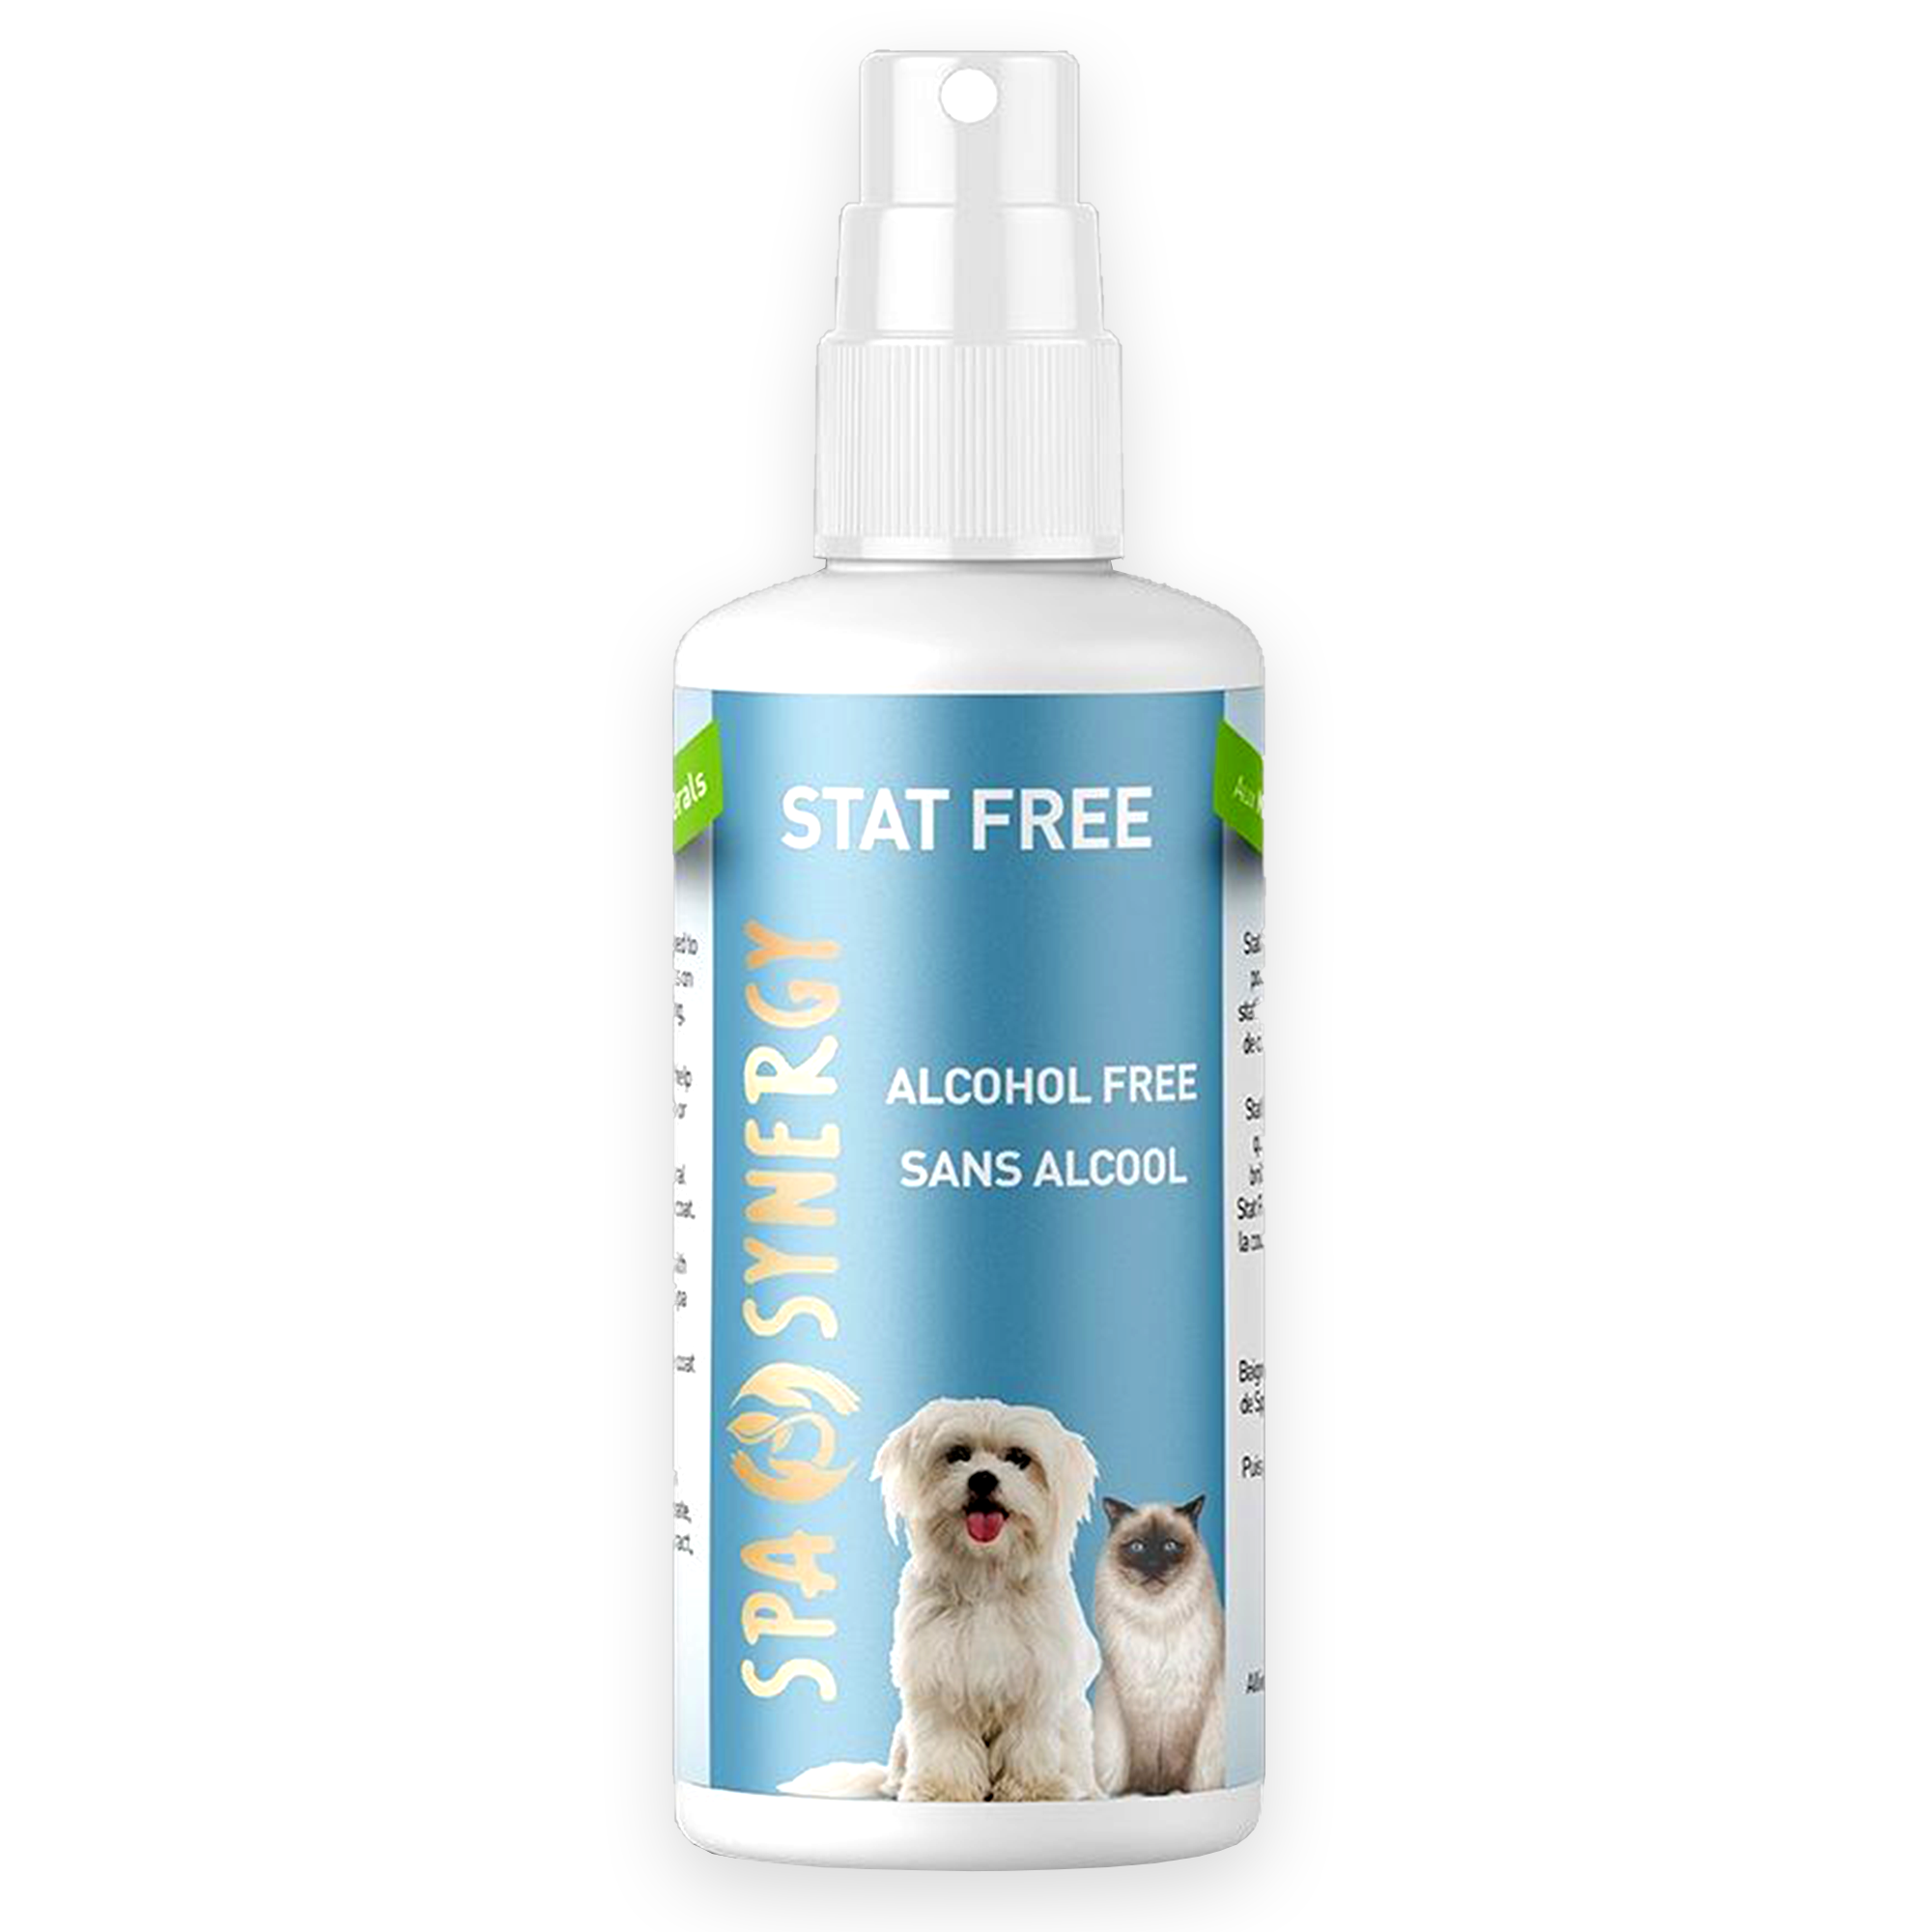 Spa Synergy Stat Free Alcohol-Free Spritzer, Fresh & Clean Scent (190ml)